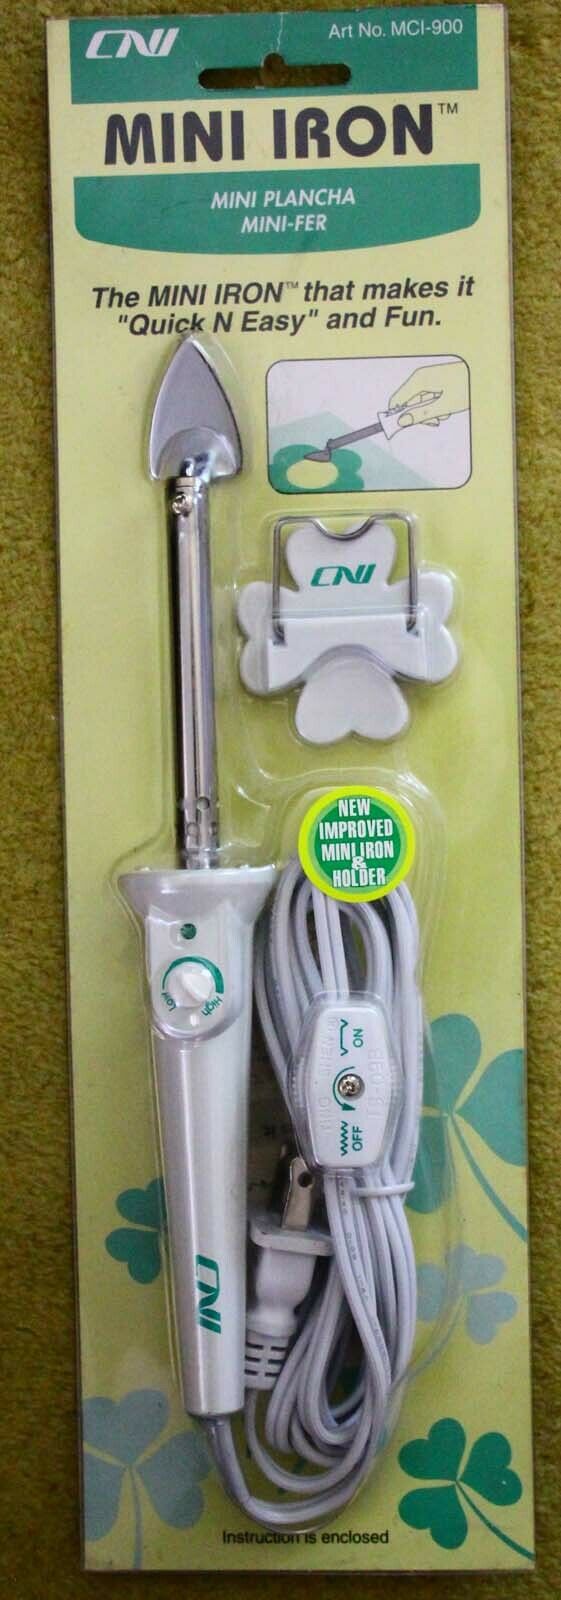 Clover Needlecraft Mini Iron For Quilting Sewing Mci-900 With Holder